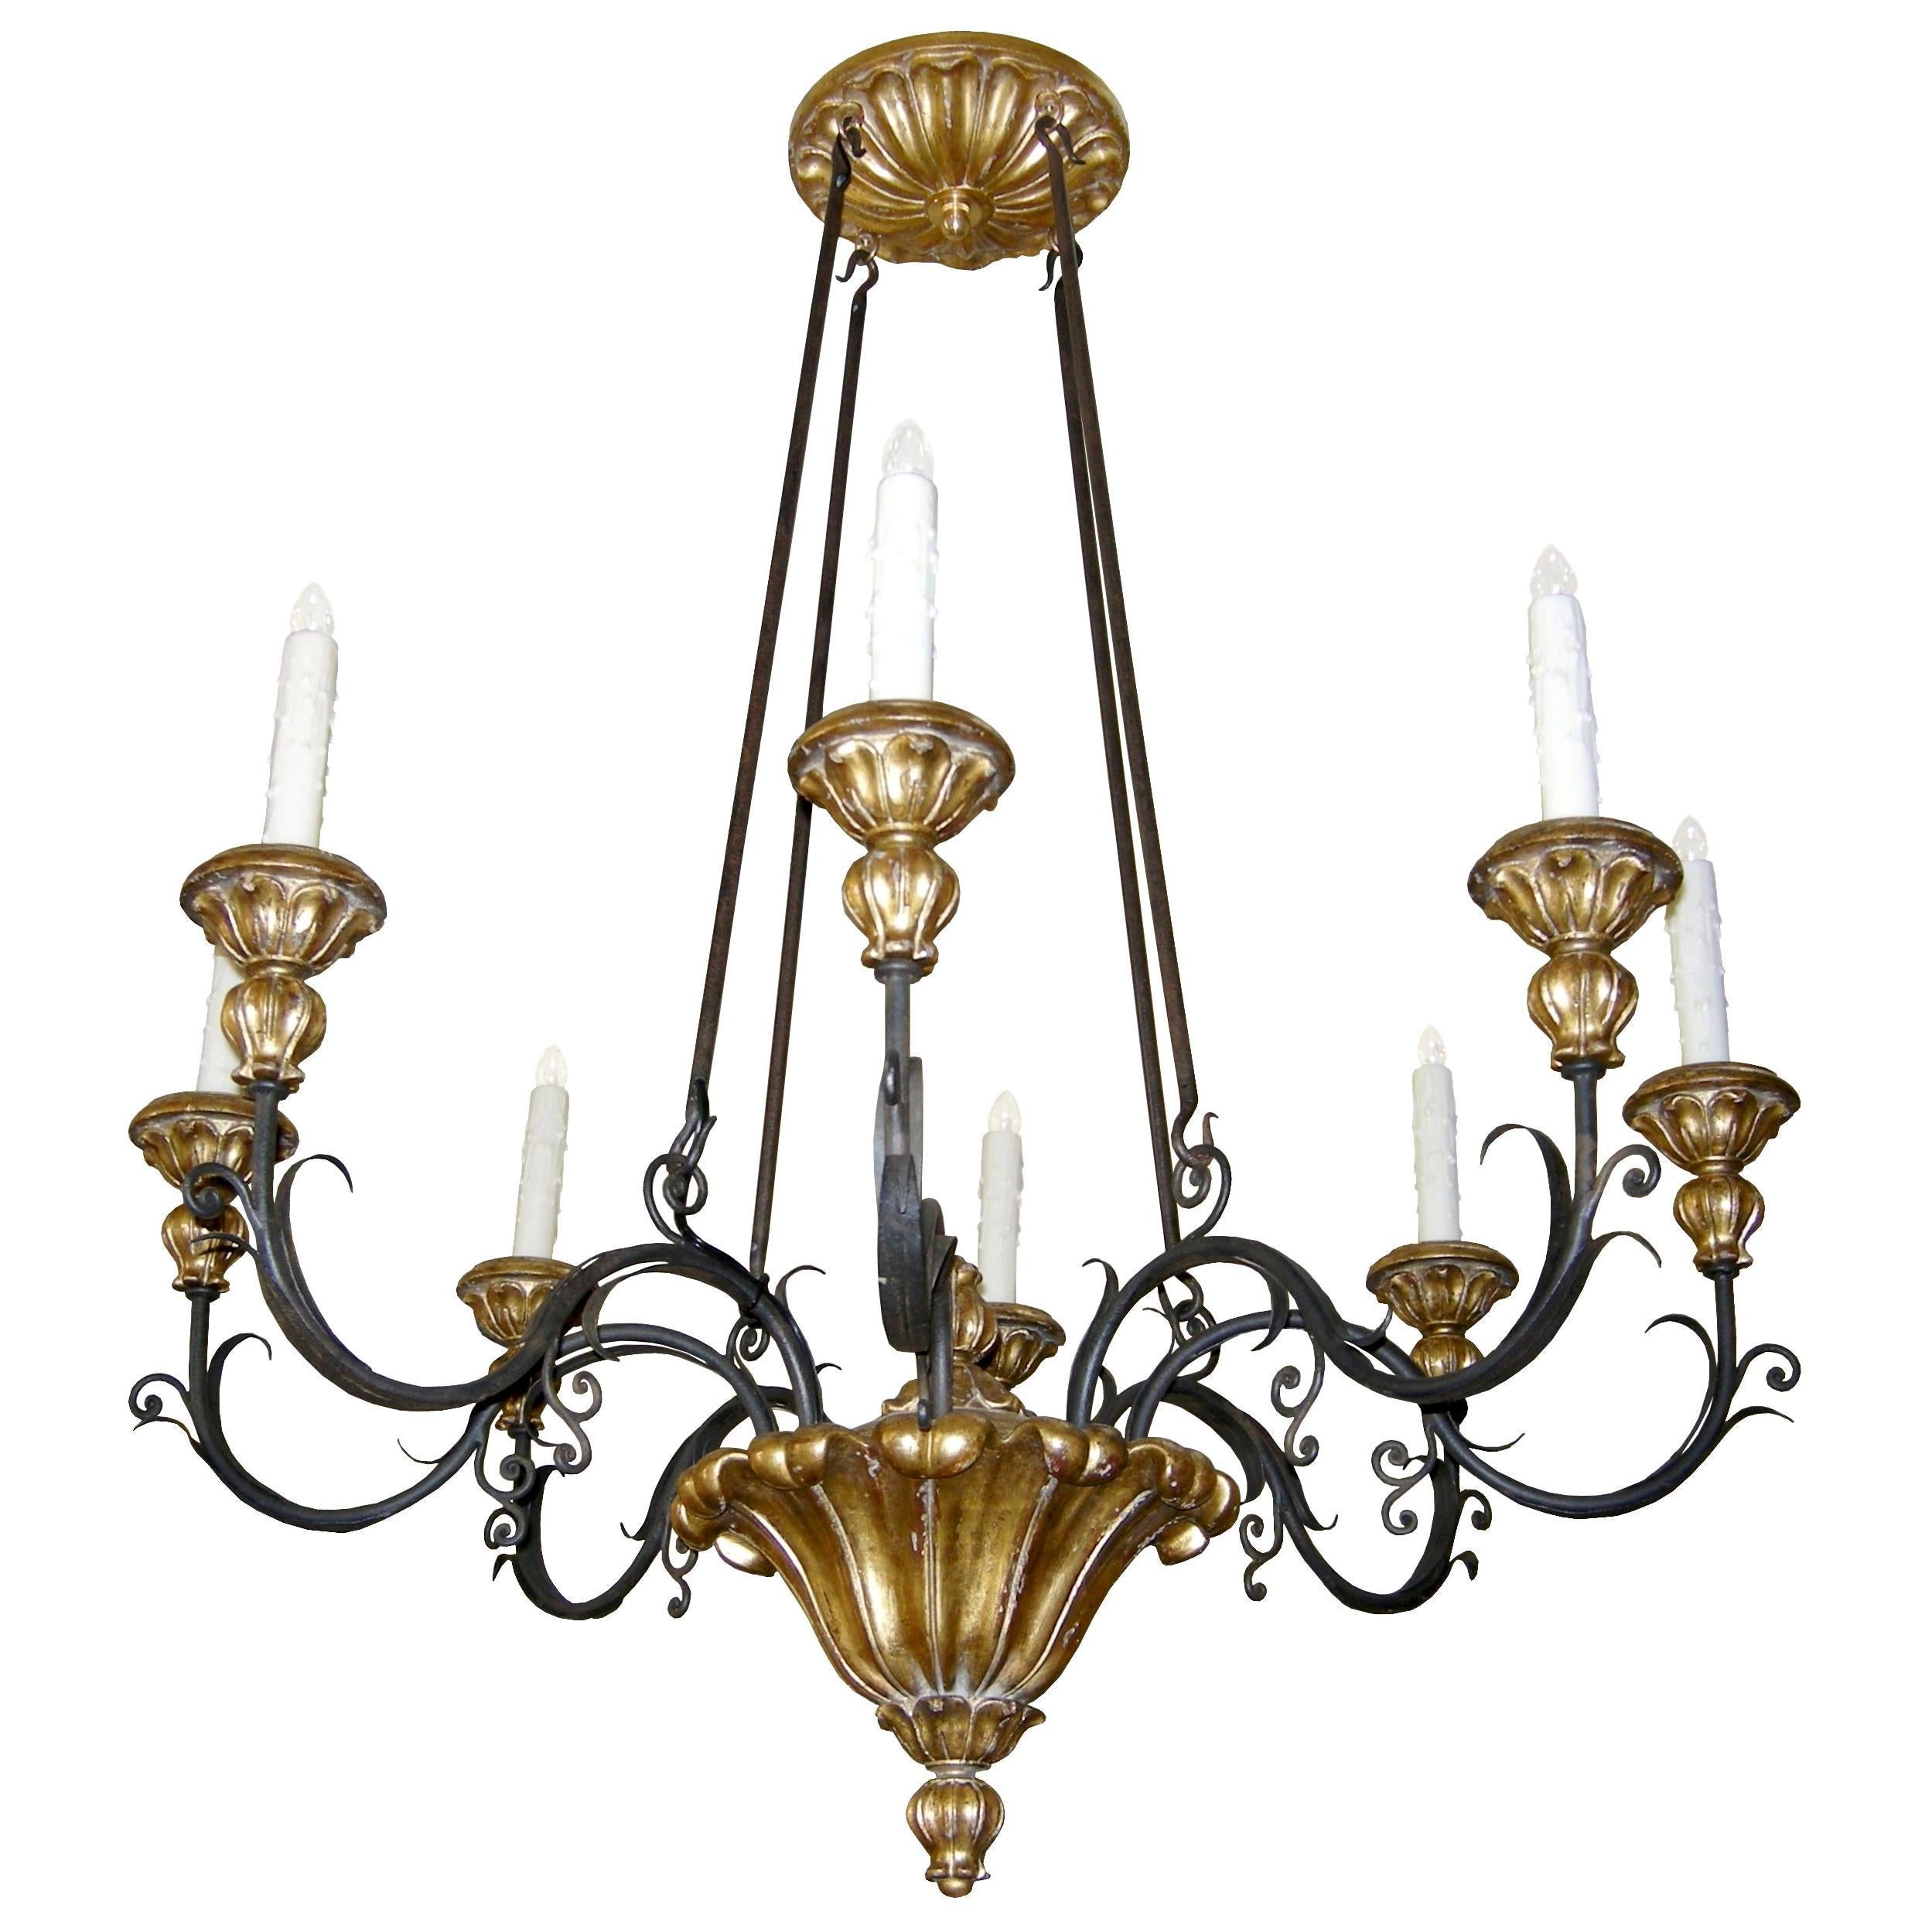 Item #: 9024 - Veneto chandelier (12-arm)
Note: This chandelier canopy shown mounts directly to ceiling, if need longer drop, inquire about transition modification.
Finish: 23-karat distressed white gold, carved giltwood & iron
Dimensions: 44